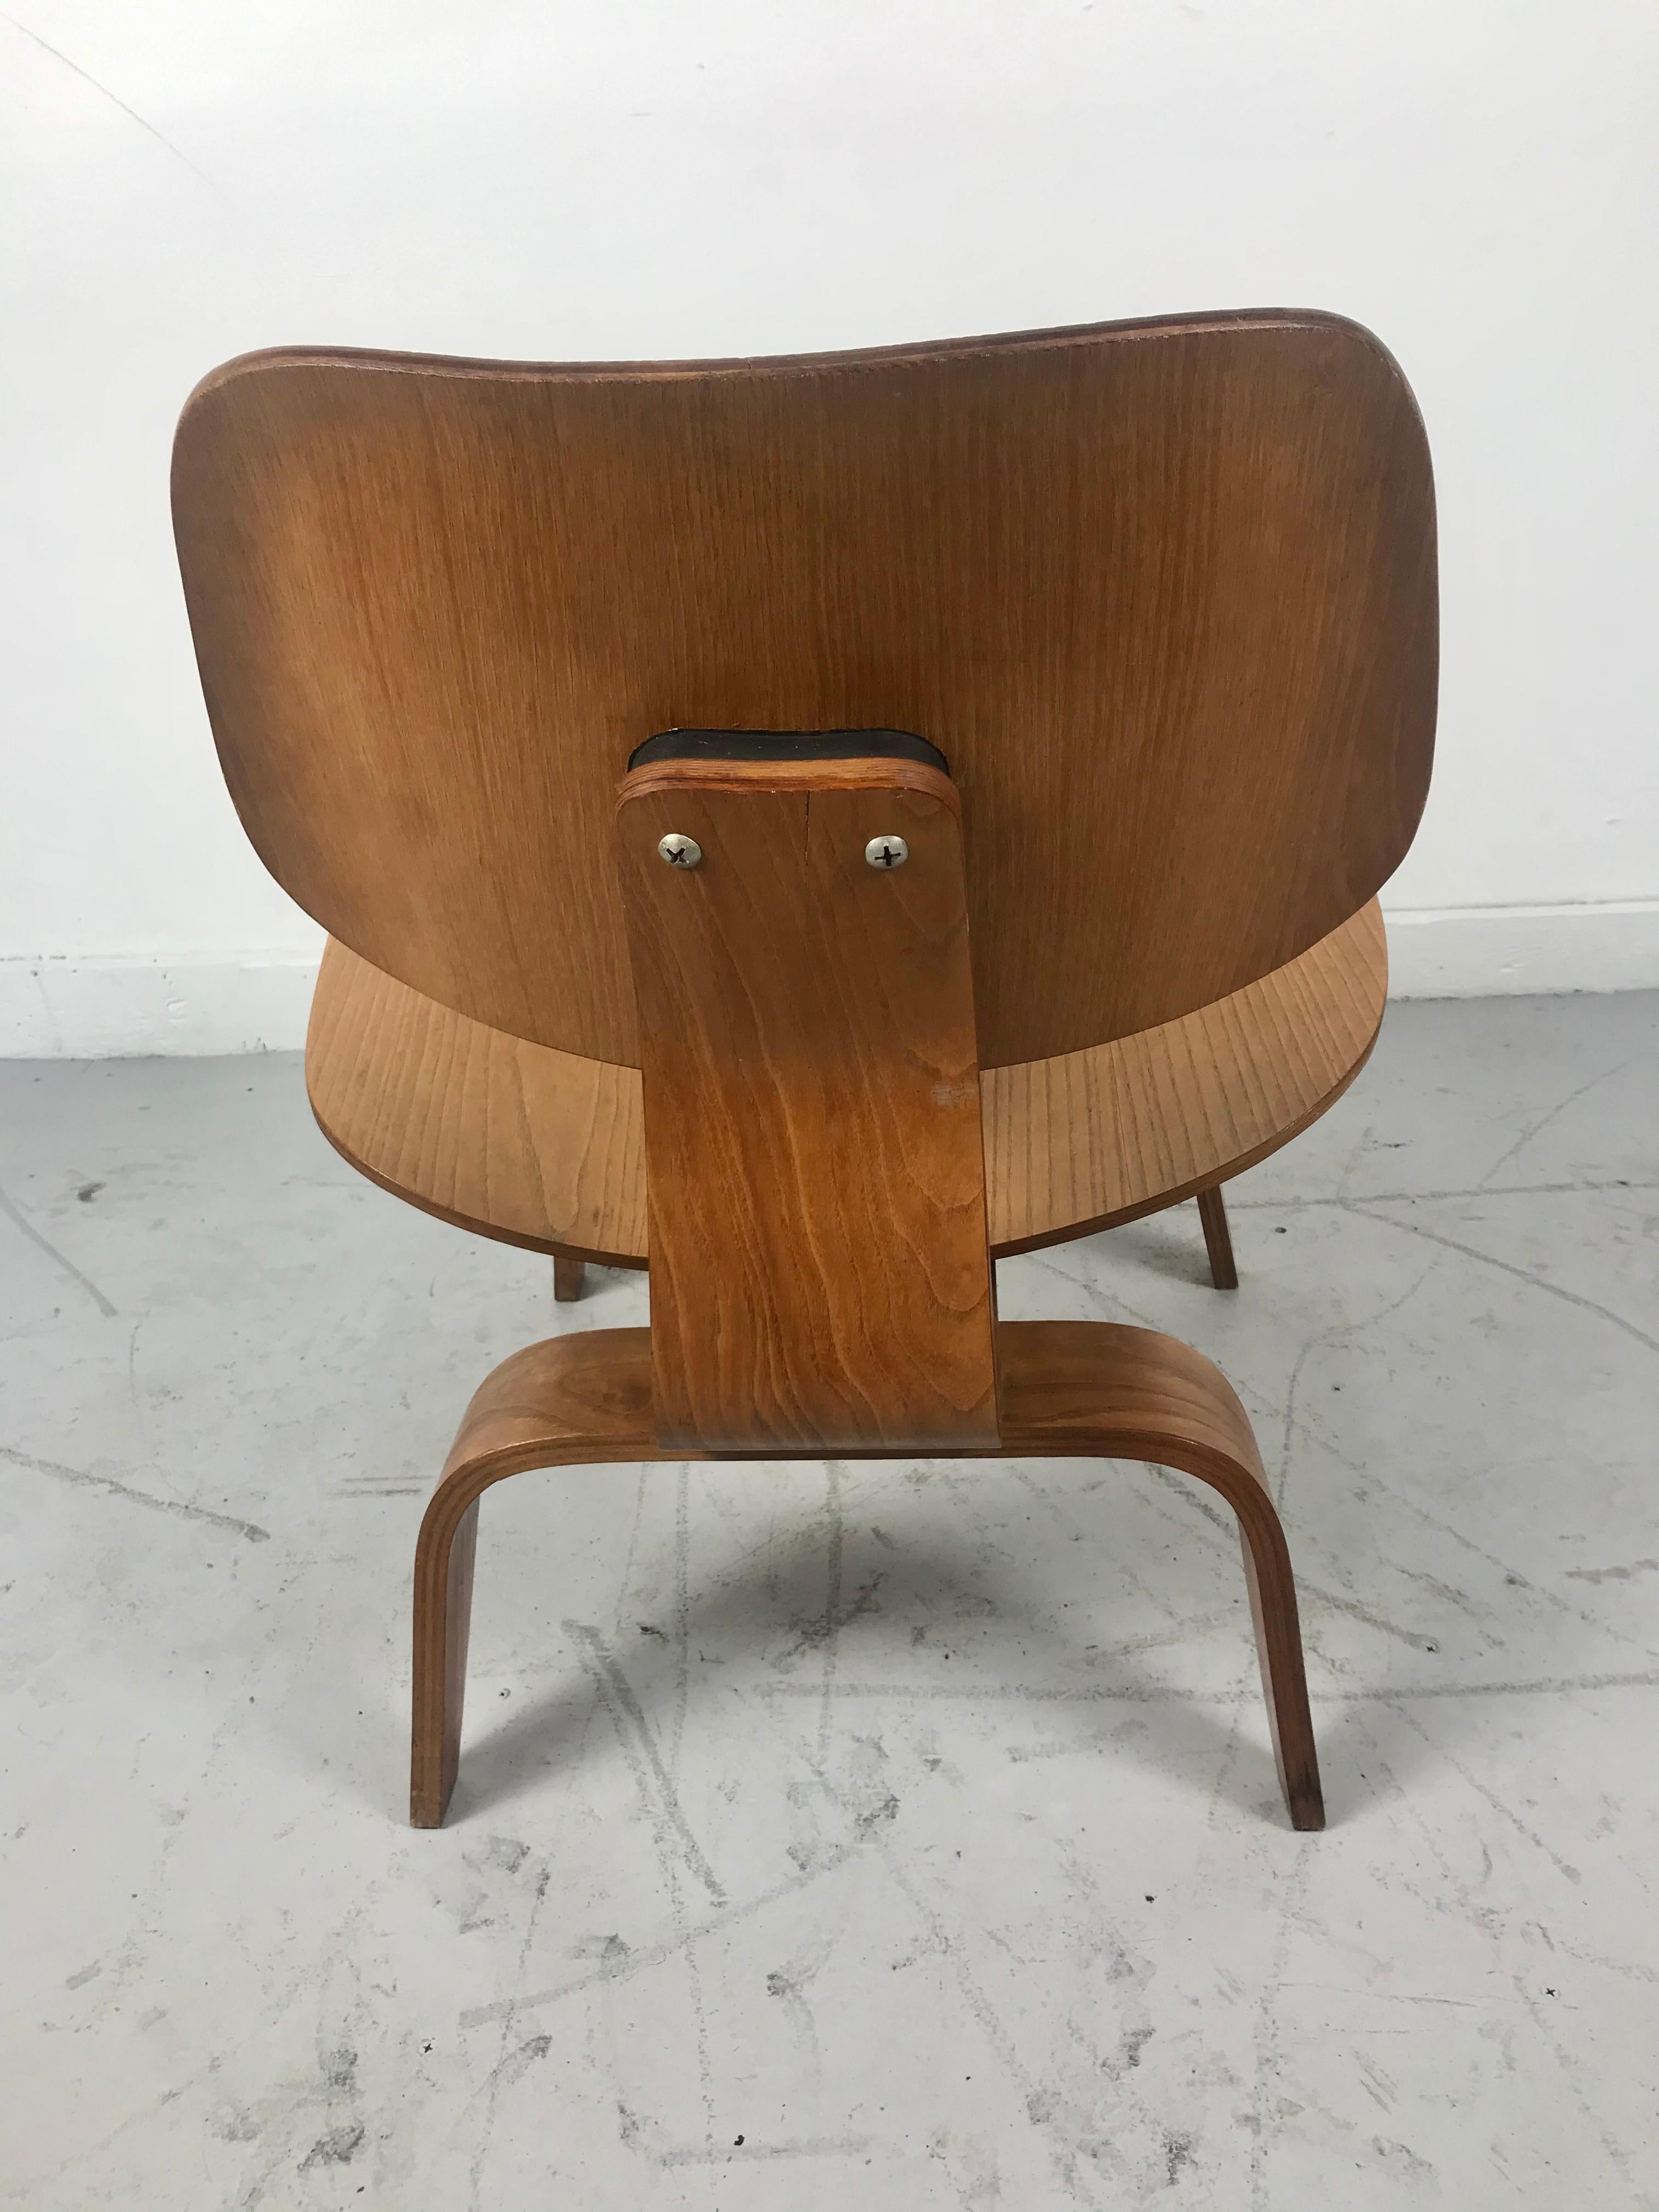 Classic First Year Production Eames LCW, Evans Label 5 2 5 Screw Configuration In Good Condition For Sale In Buffalo, NY